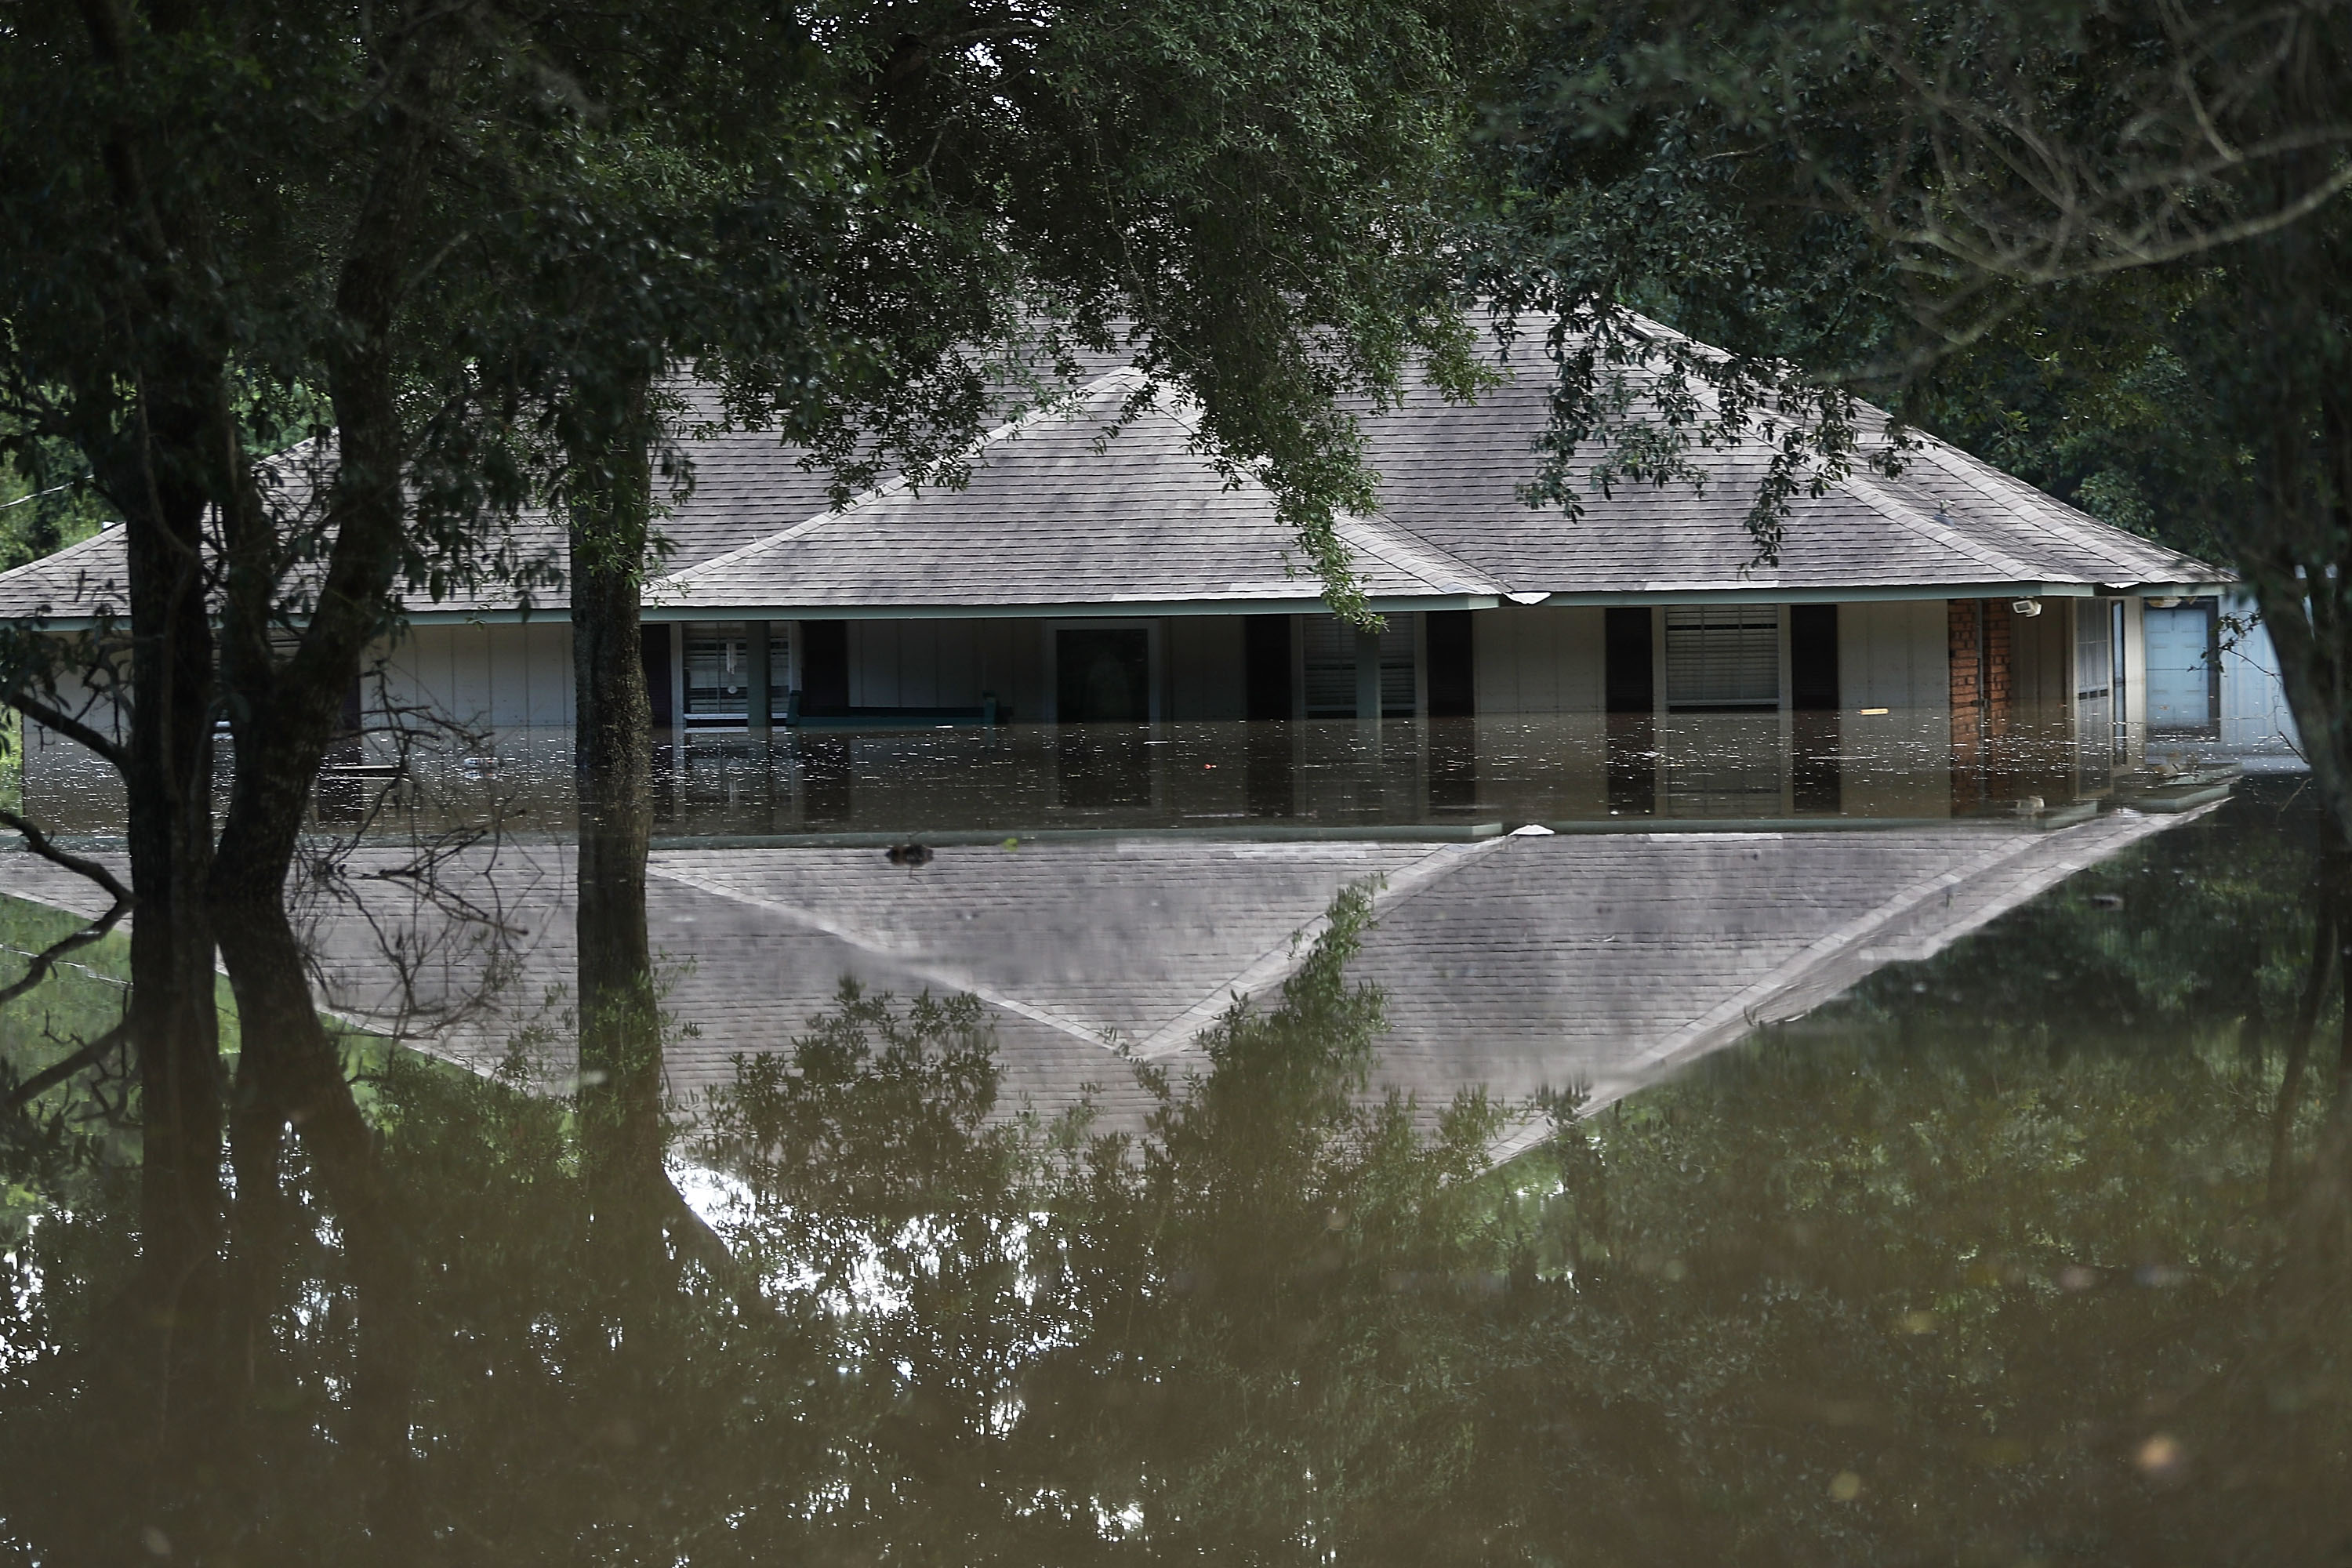 A flooded home is seen on Aug. 15, 2016 in Baton Rouge, Louisiana. (Joe Raedle—Getty Images)